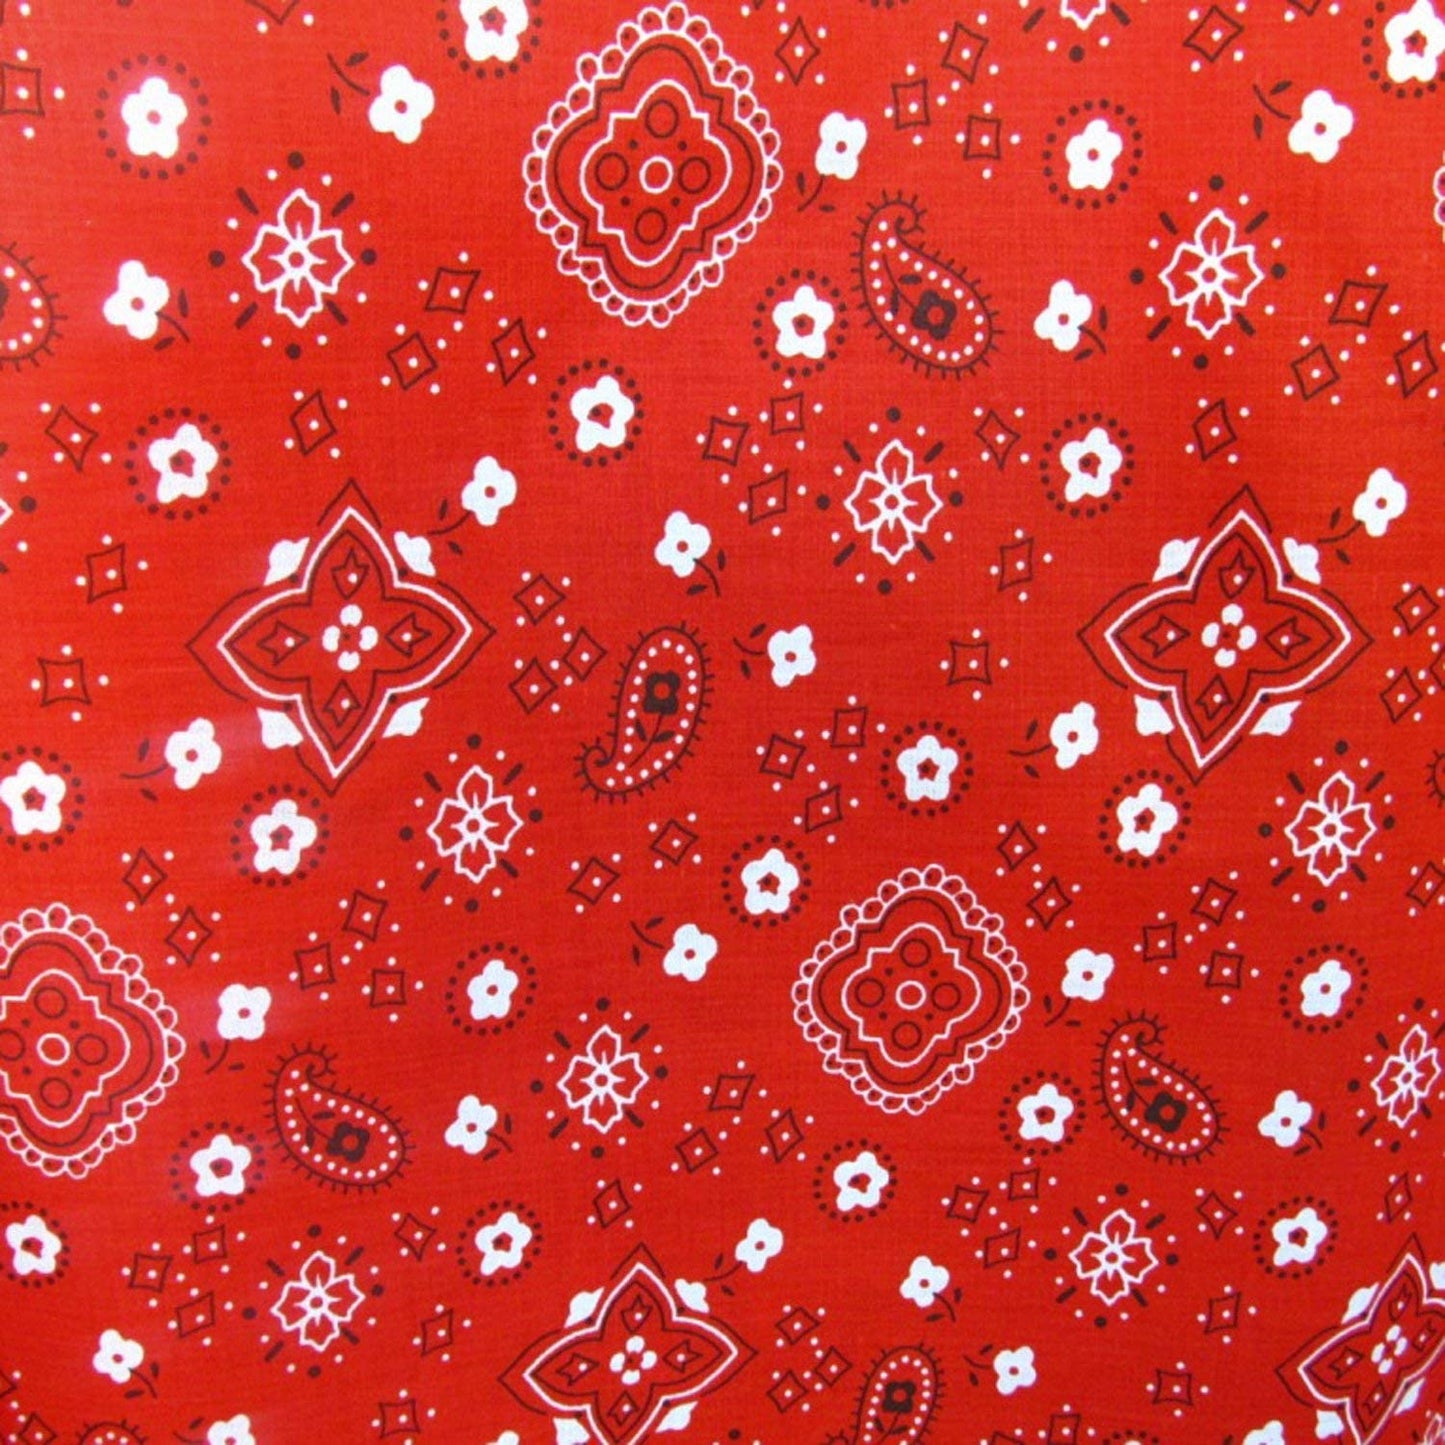 60" Wide Poly Cotton Print Bandanna Fabric by The Yard (Red, by The Yard)